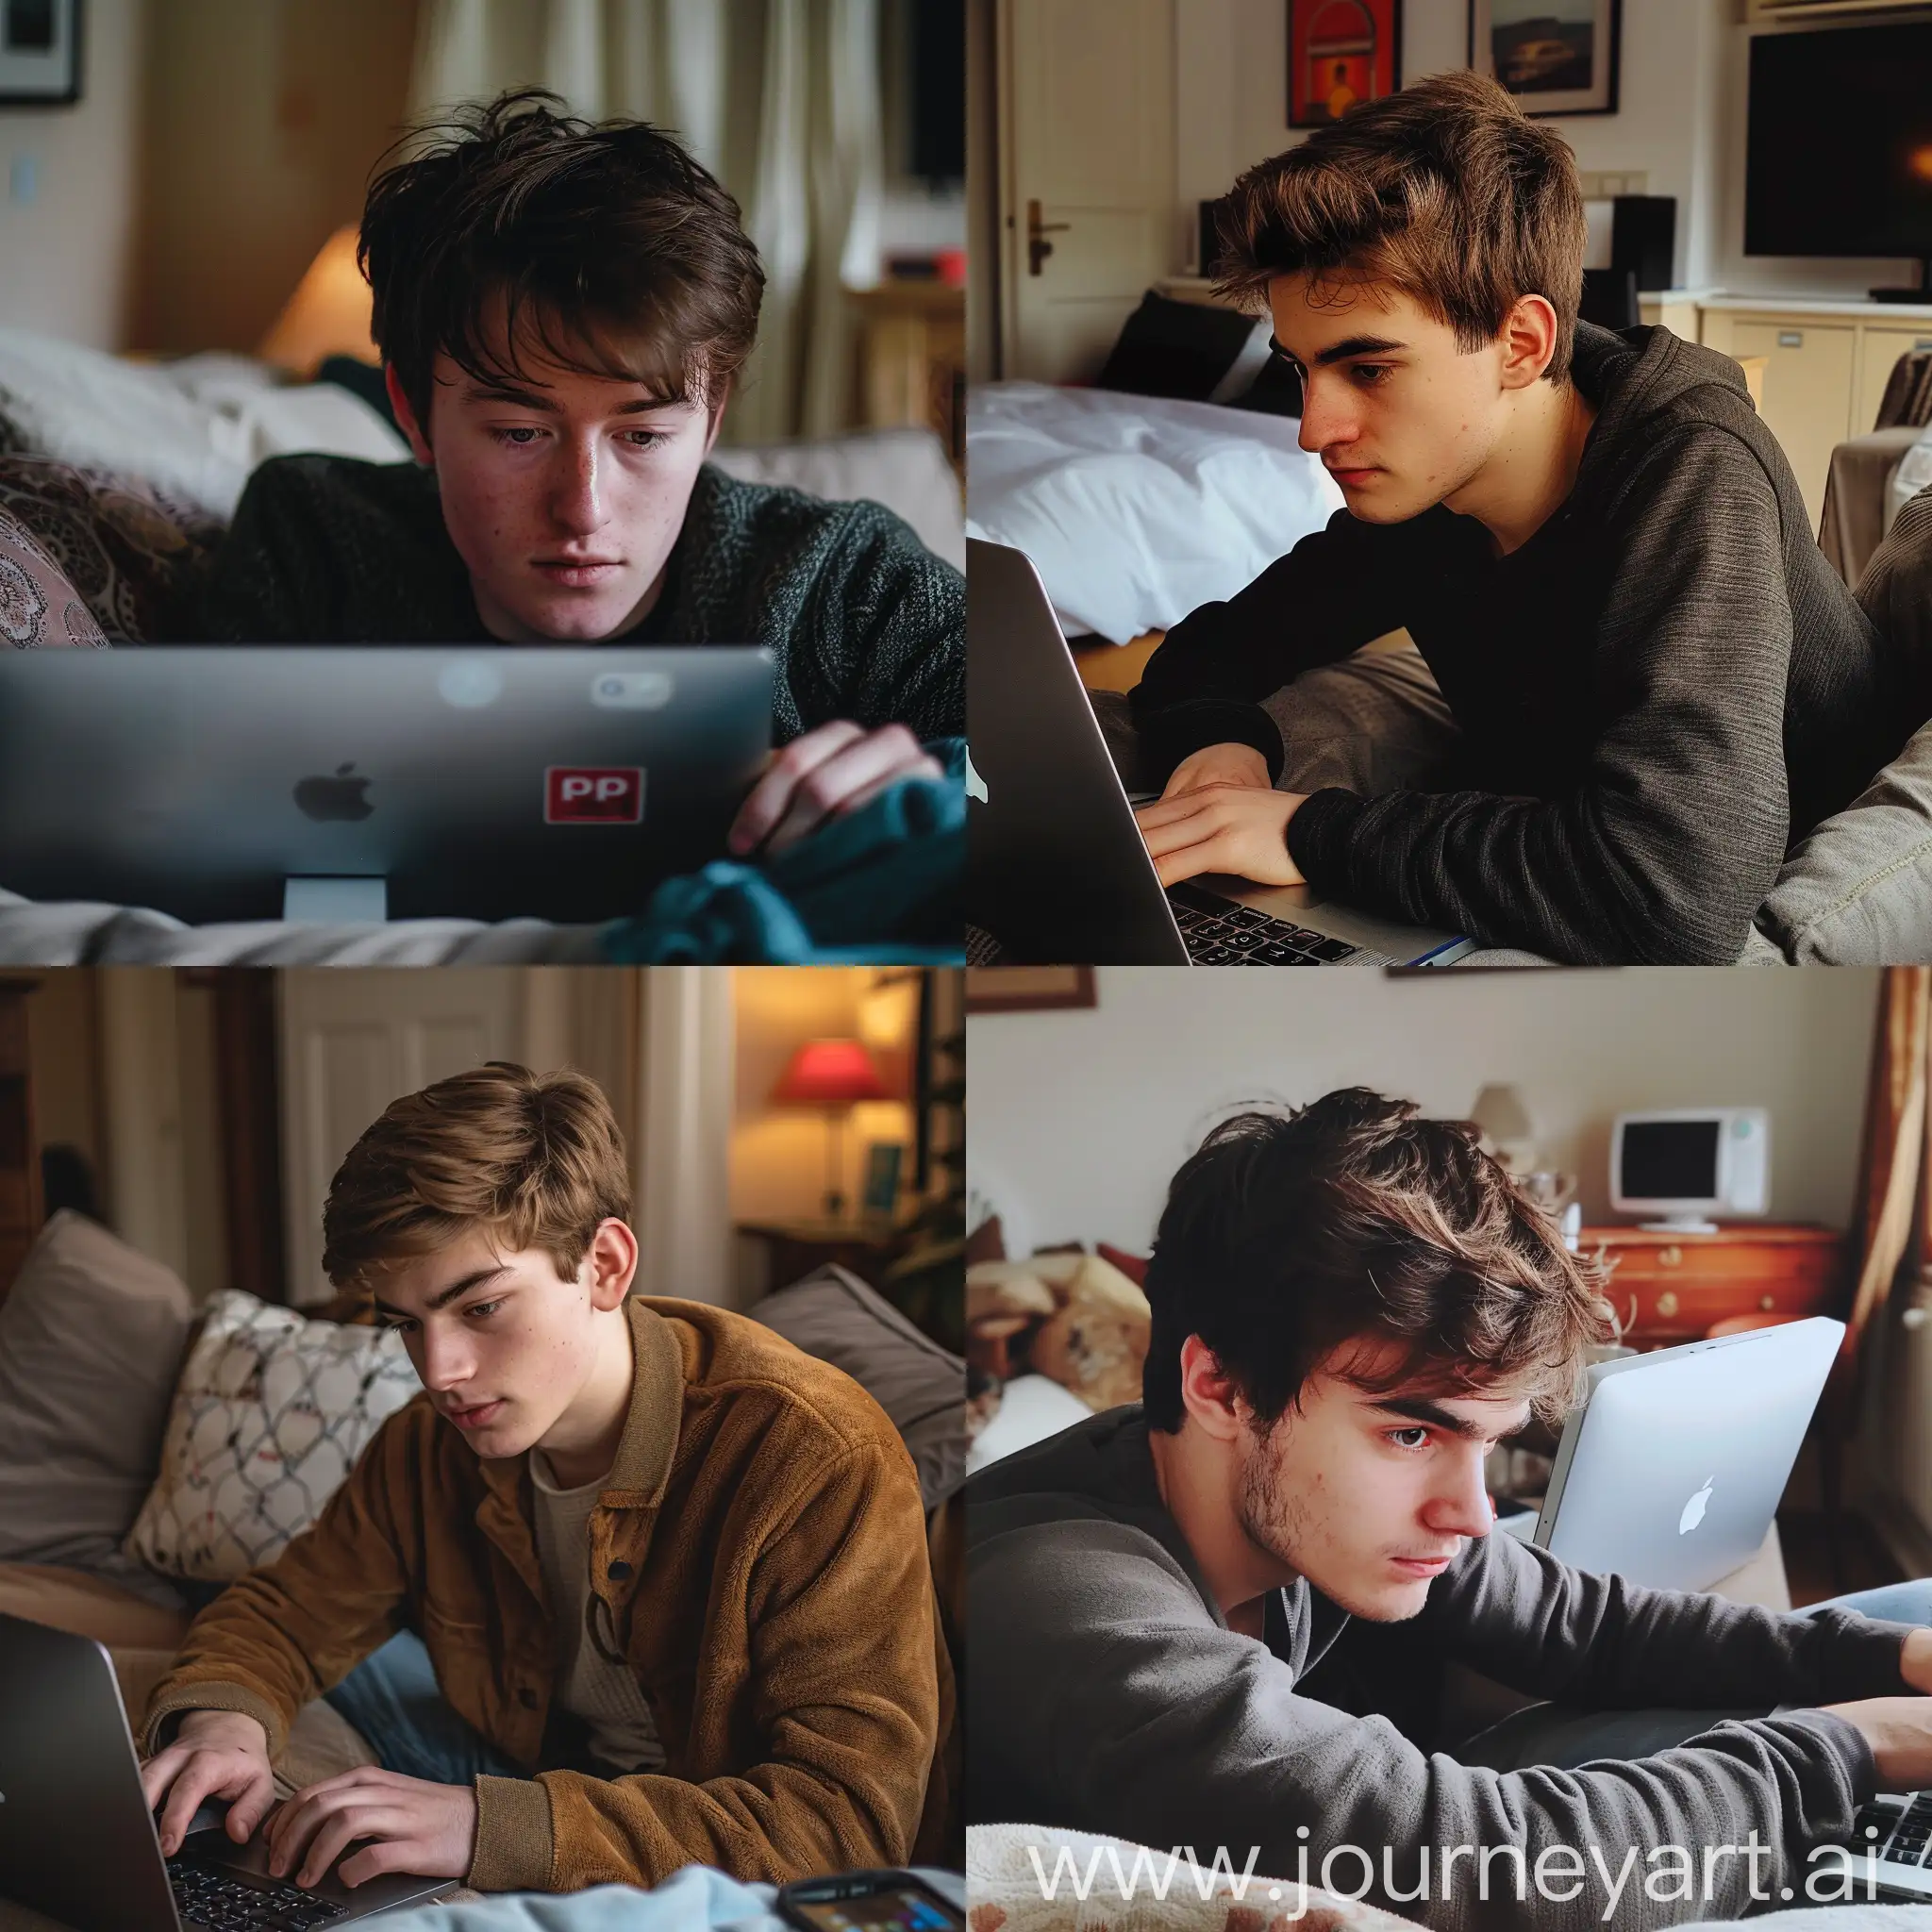 Young-Man-Working-on-Apple-Computer-in-Cozy-Apartment-Setting